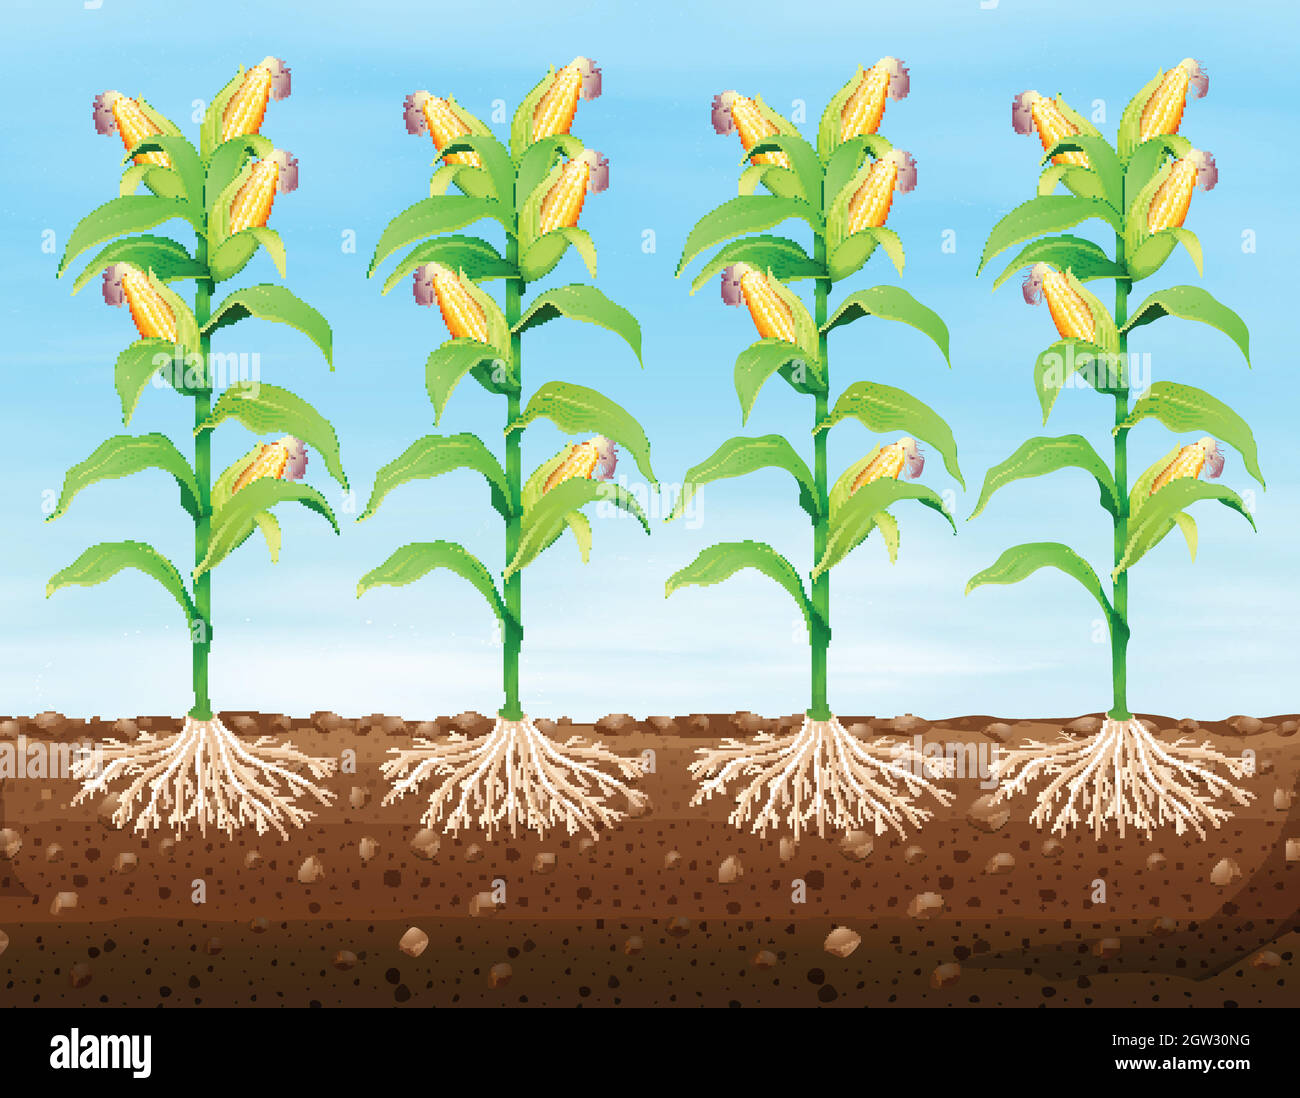 Corn planting on the ground Stock Vector